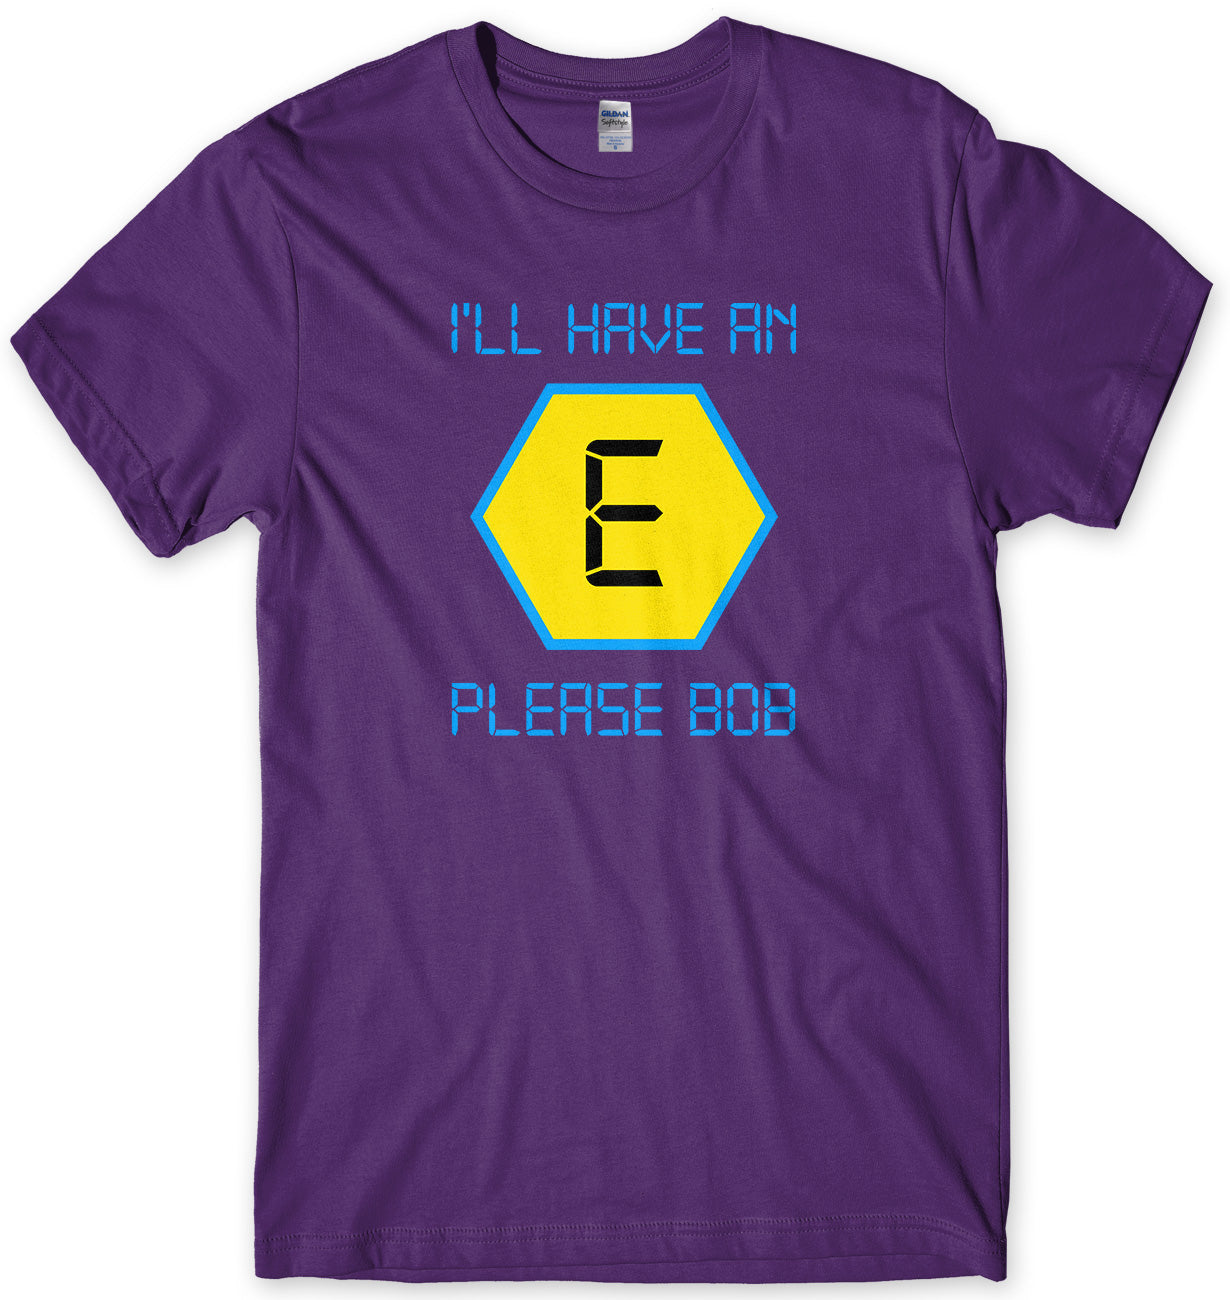 I'LL HAVE AN E PLEASE BOB - INSPIRED BY BLOCKBUSTERS MENS UNISEX T-SHIRT